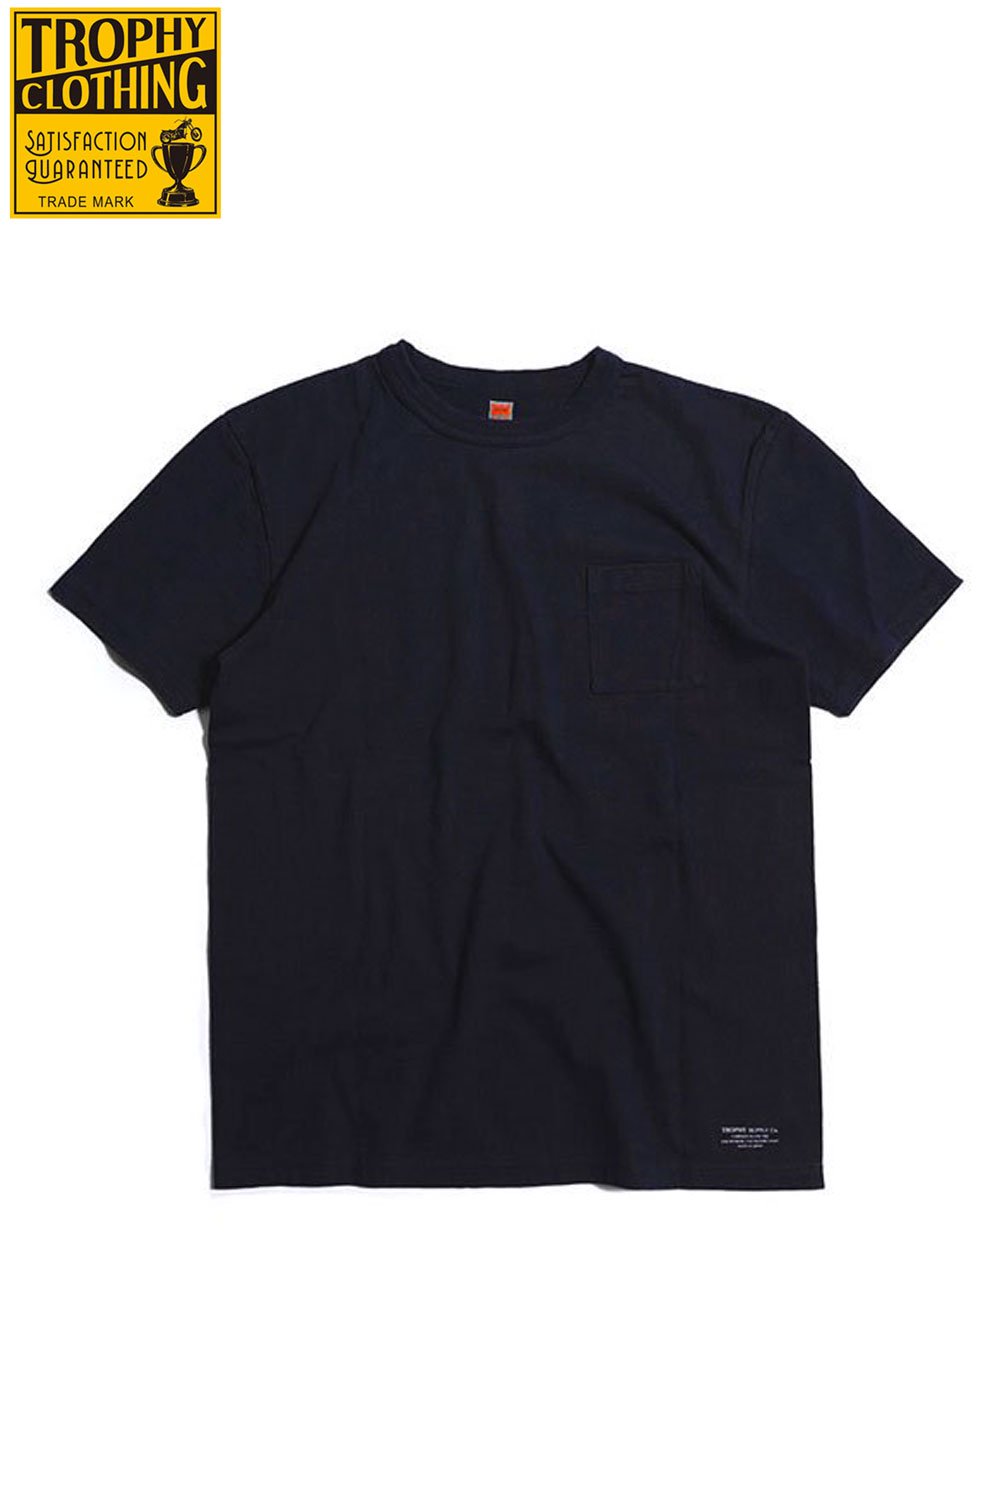 TROPHY CLOTHING(トロフィークロージング) Tシャツ RANCH LOGO LOOP WHEEL TEE TR22SS-208  通販正規取扱 | ハーレムストア公式通販サイト